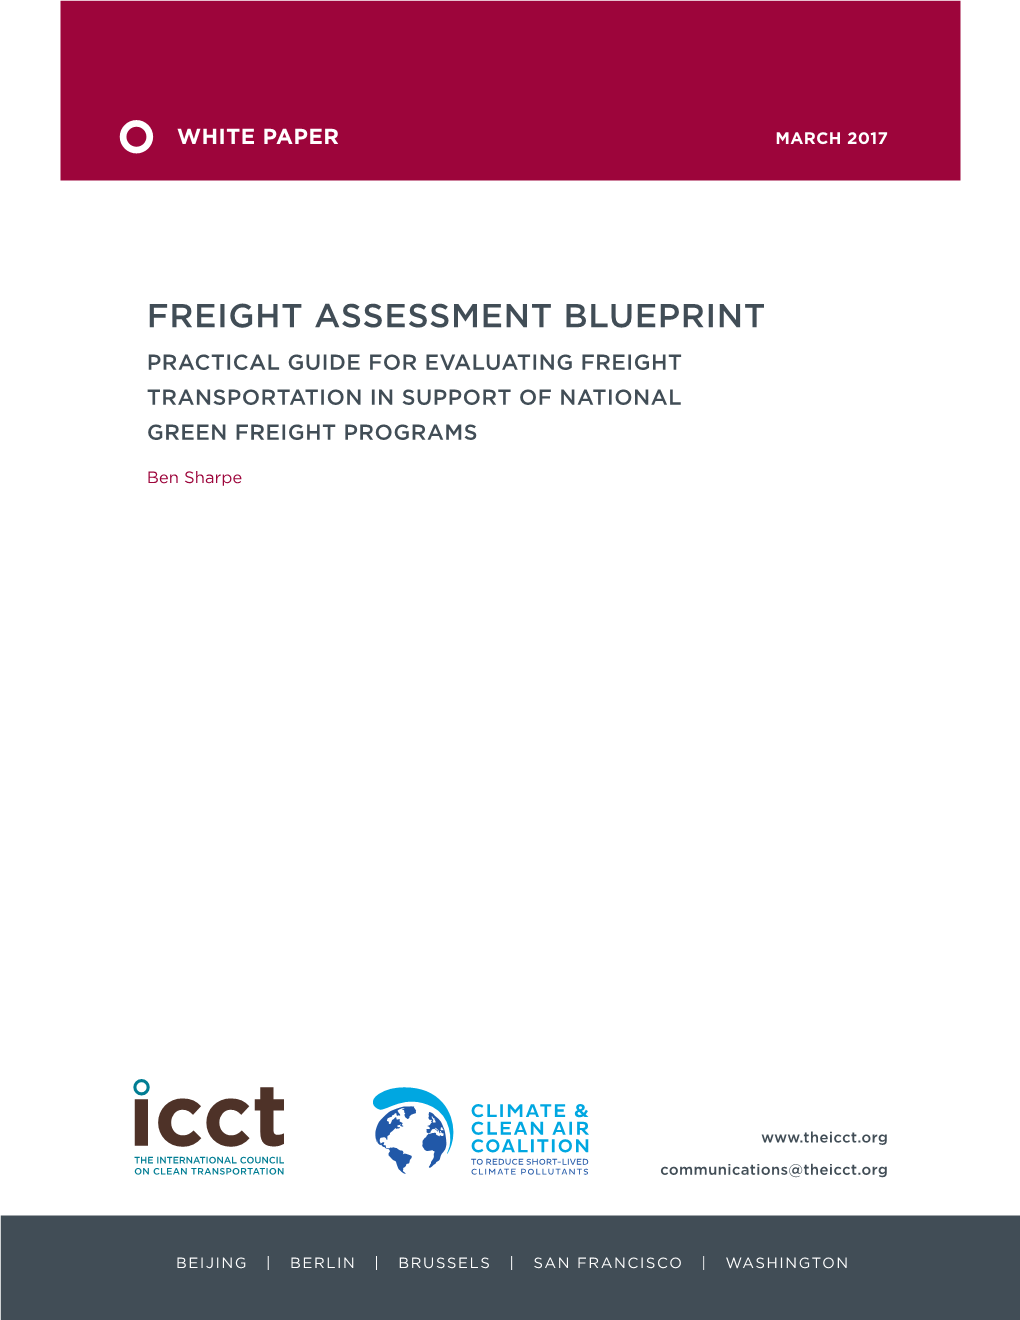 Freight Assessment Blueprint Practical Guide for Evaluating Freight Transportation in Support of National Green Freight Programs